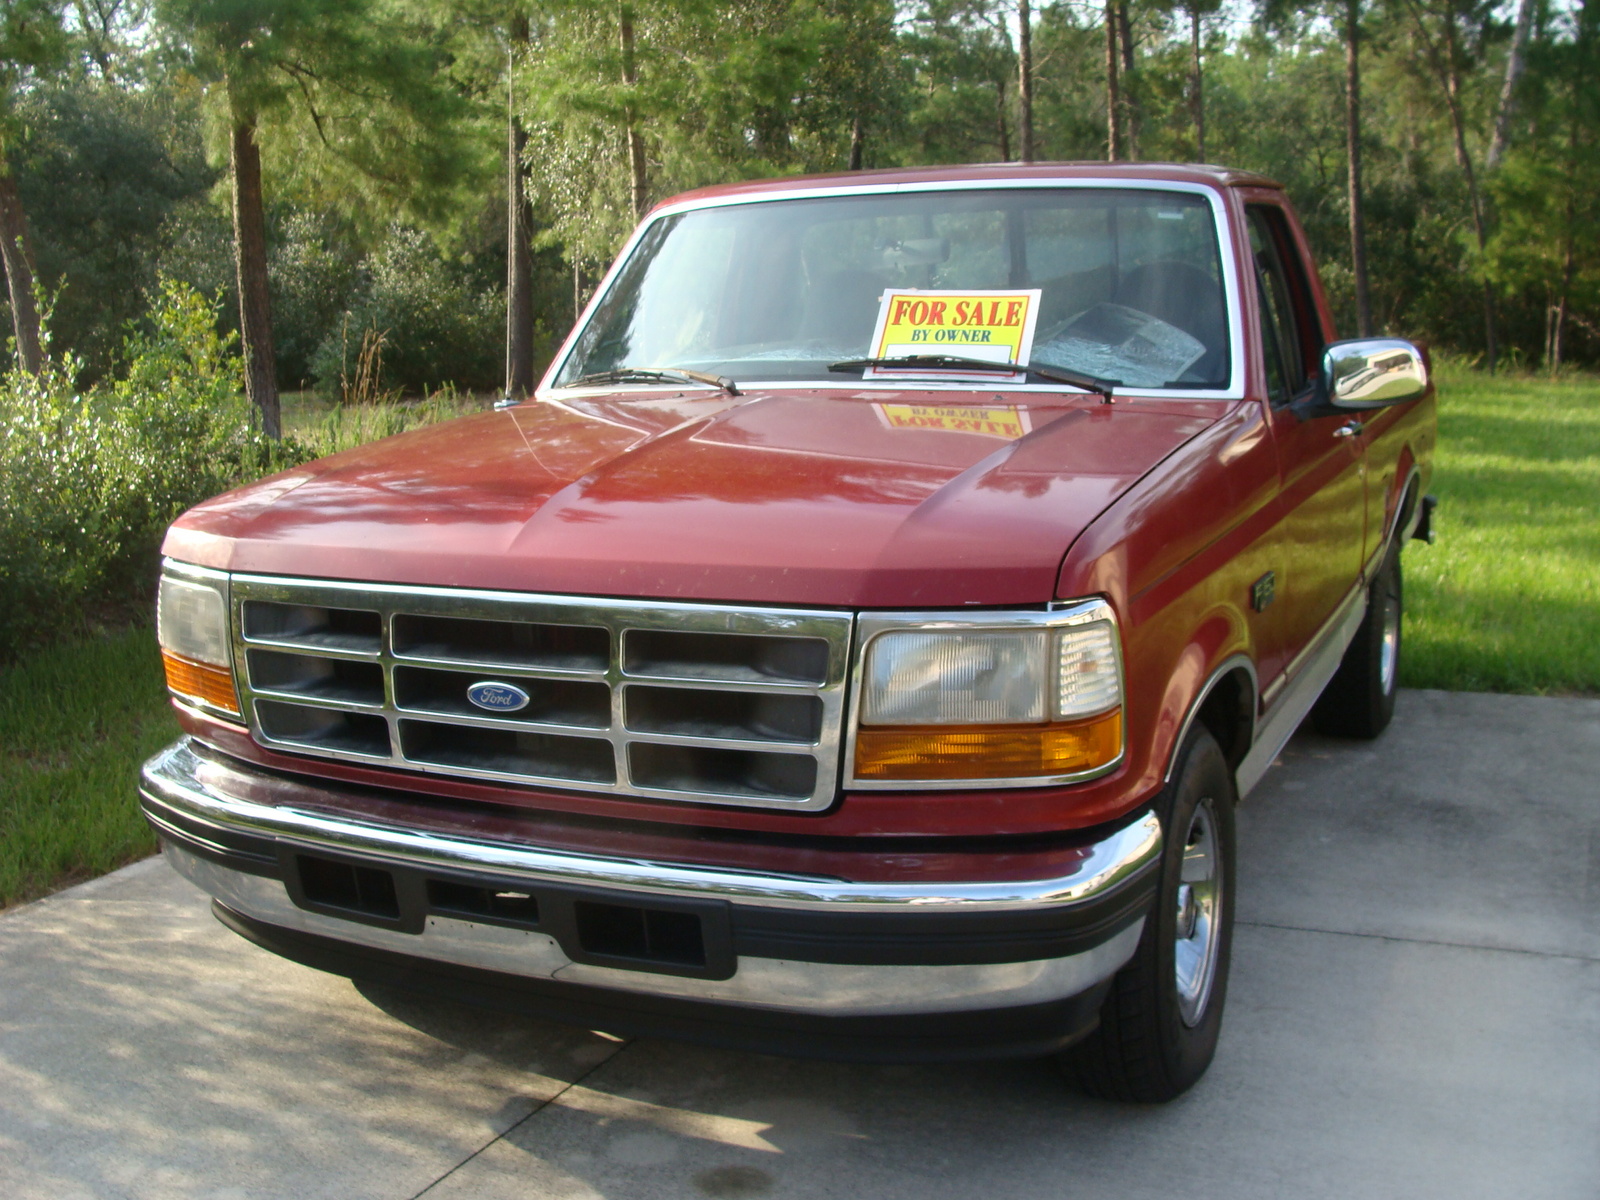 1996 Ford f150 xlt review #6